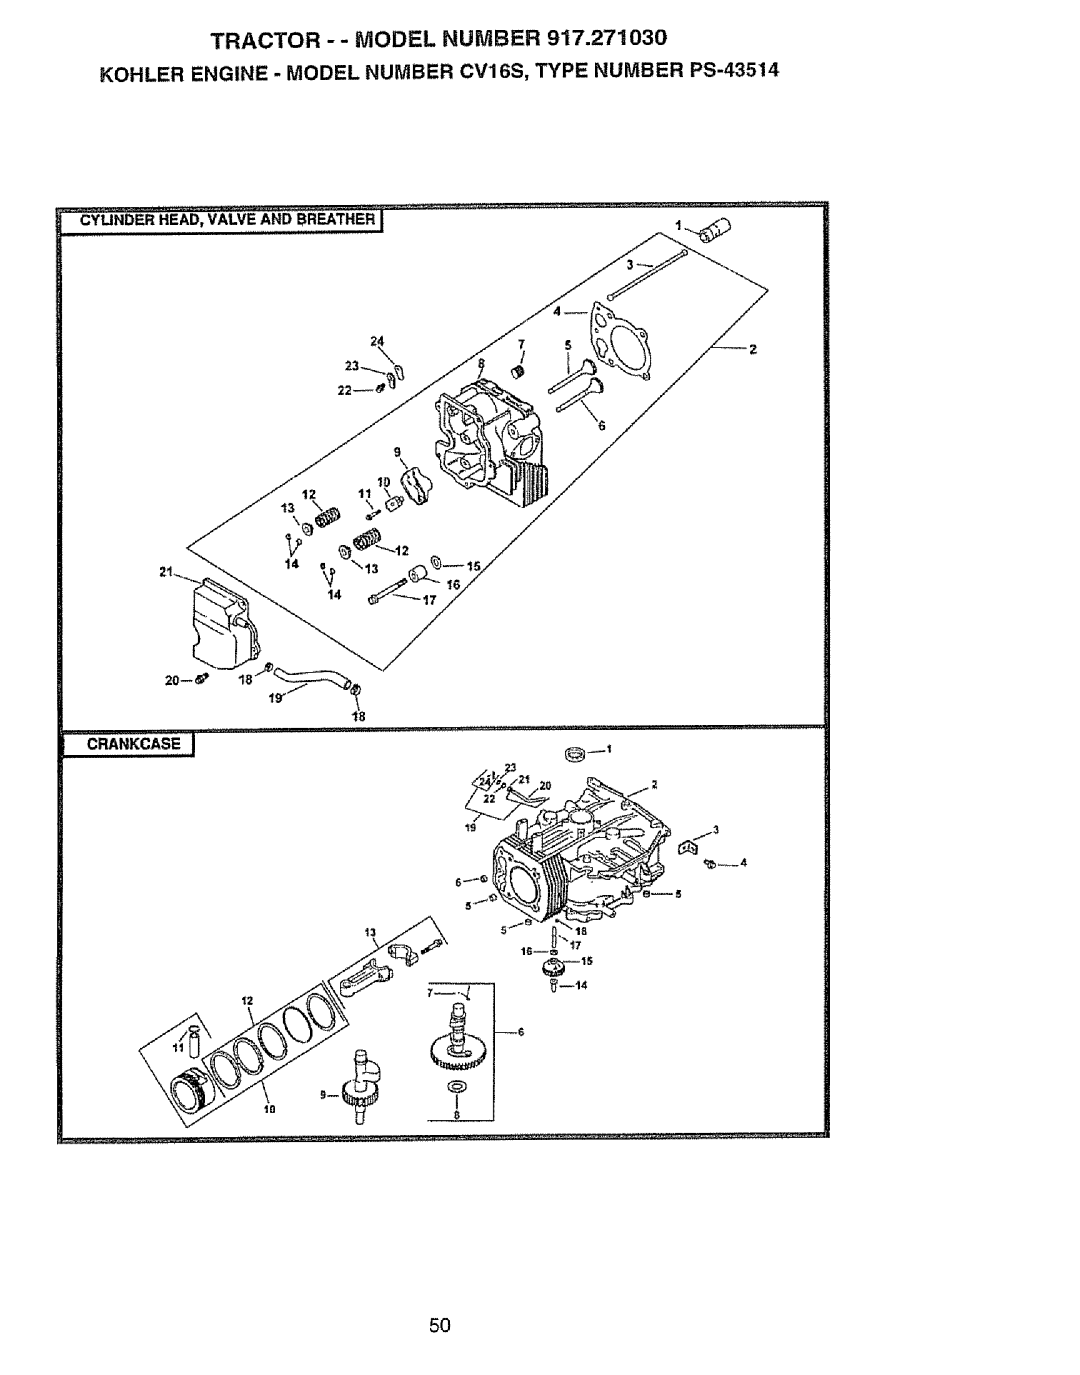 Craftsman 917.27103 owner manual C.A.Kcas, Tractor -- Model Number, Cylinder Head, Valve And Breather, 22_6t 